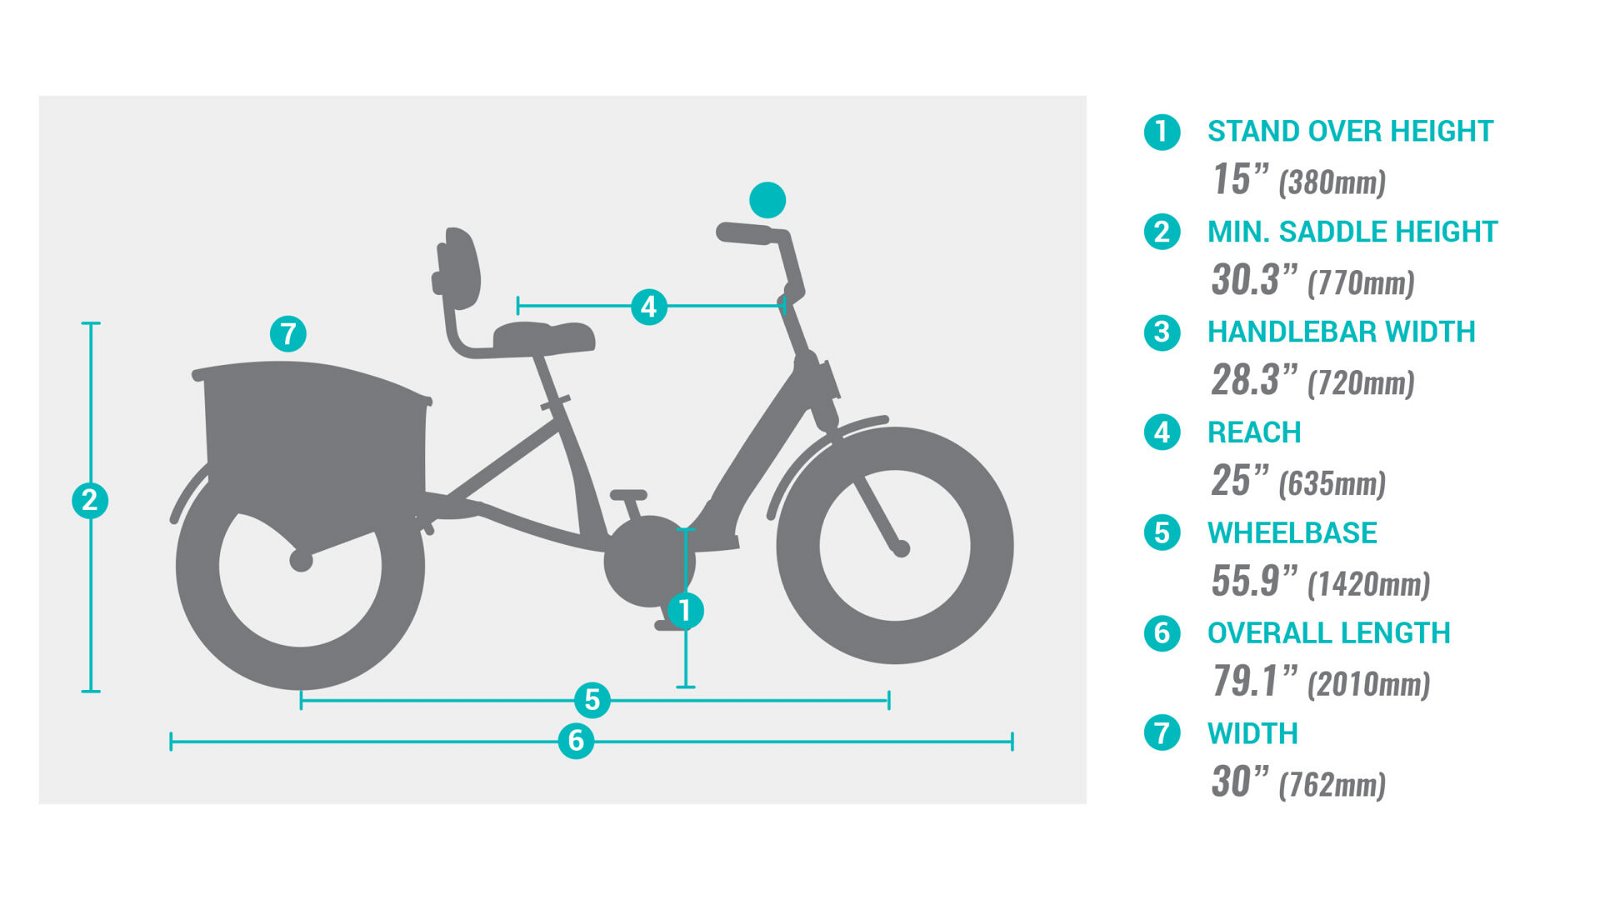 Pedego- Diagram of a FAT TIRE TRIKE with dimensions: Stand over height 15", Minimum saddle height 30.3", Handlebar width 28.3", Reach 25", Wheelbase 55.9", Overall length 79.1", and Width 30".